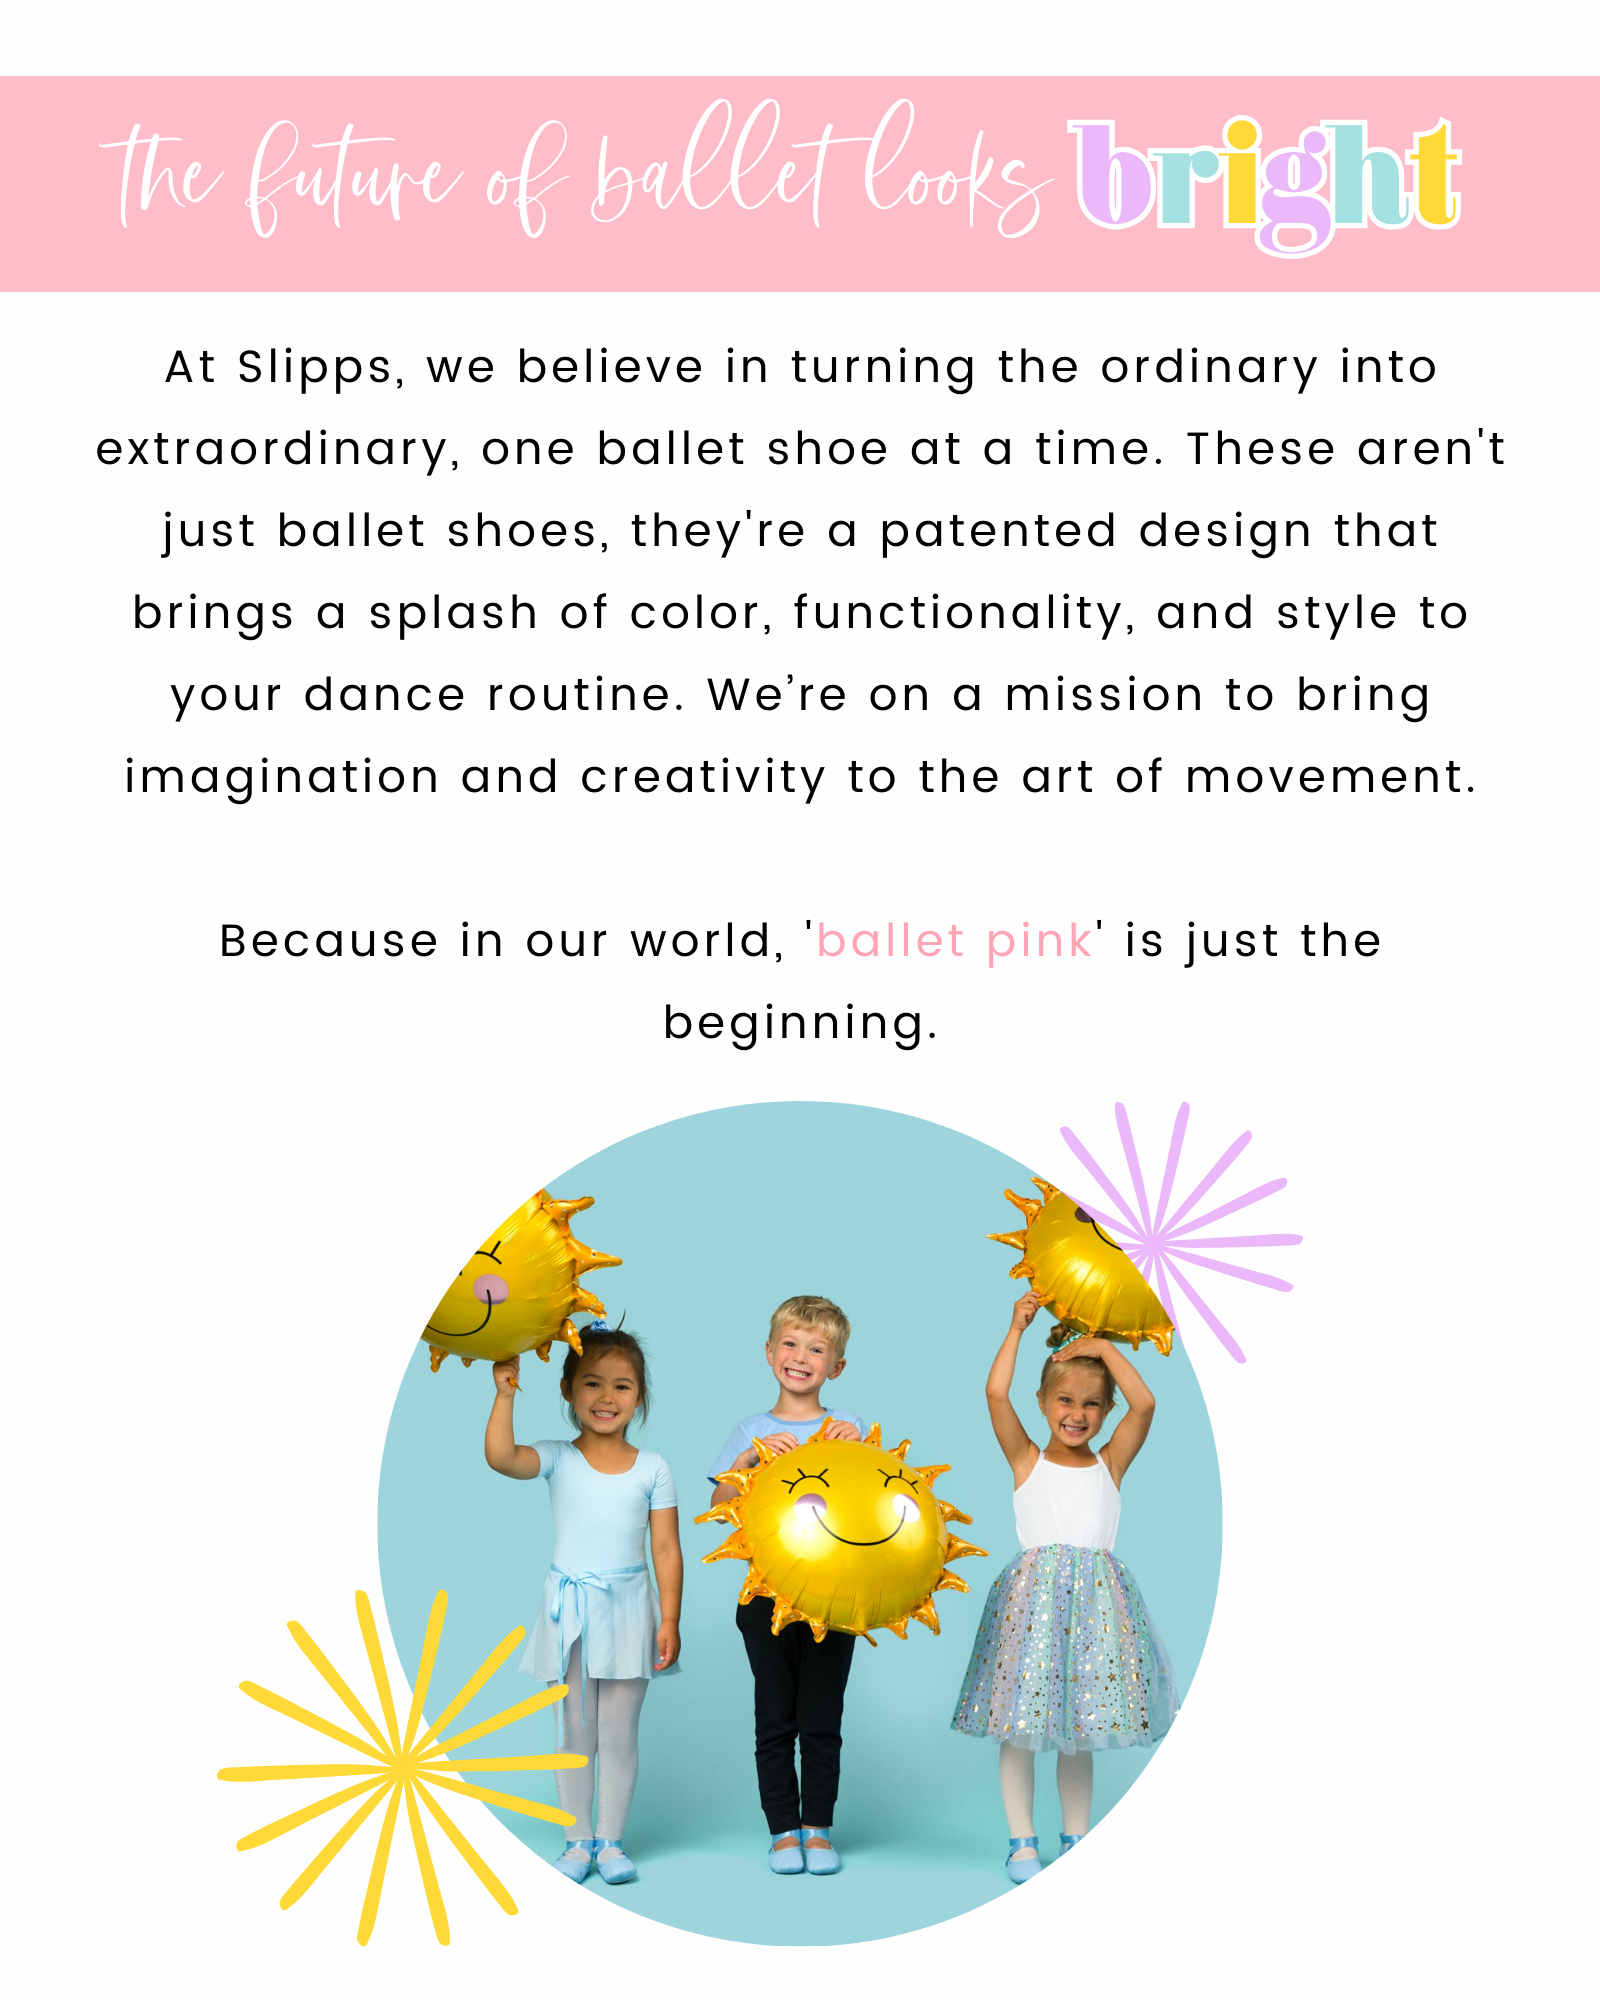 At Slipps, we believe in turning the ordinary into extraordinary, one ballet shoe at a time. These aren't just ballet shoes, they're a patented design that brings a splash of color, functionality, and style to your dance routine. We're on a mission to bring imagination and creativity to the art of movement. Because in our world, 'ballet pink' is just the beginning.